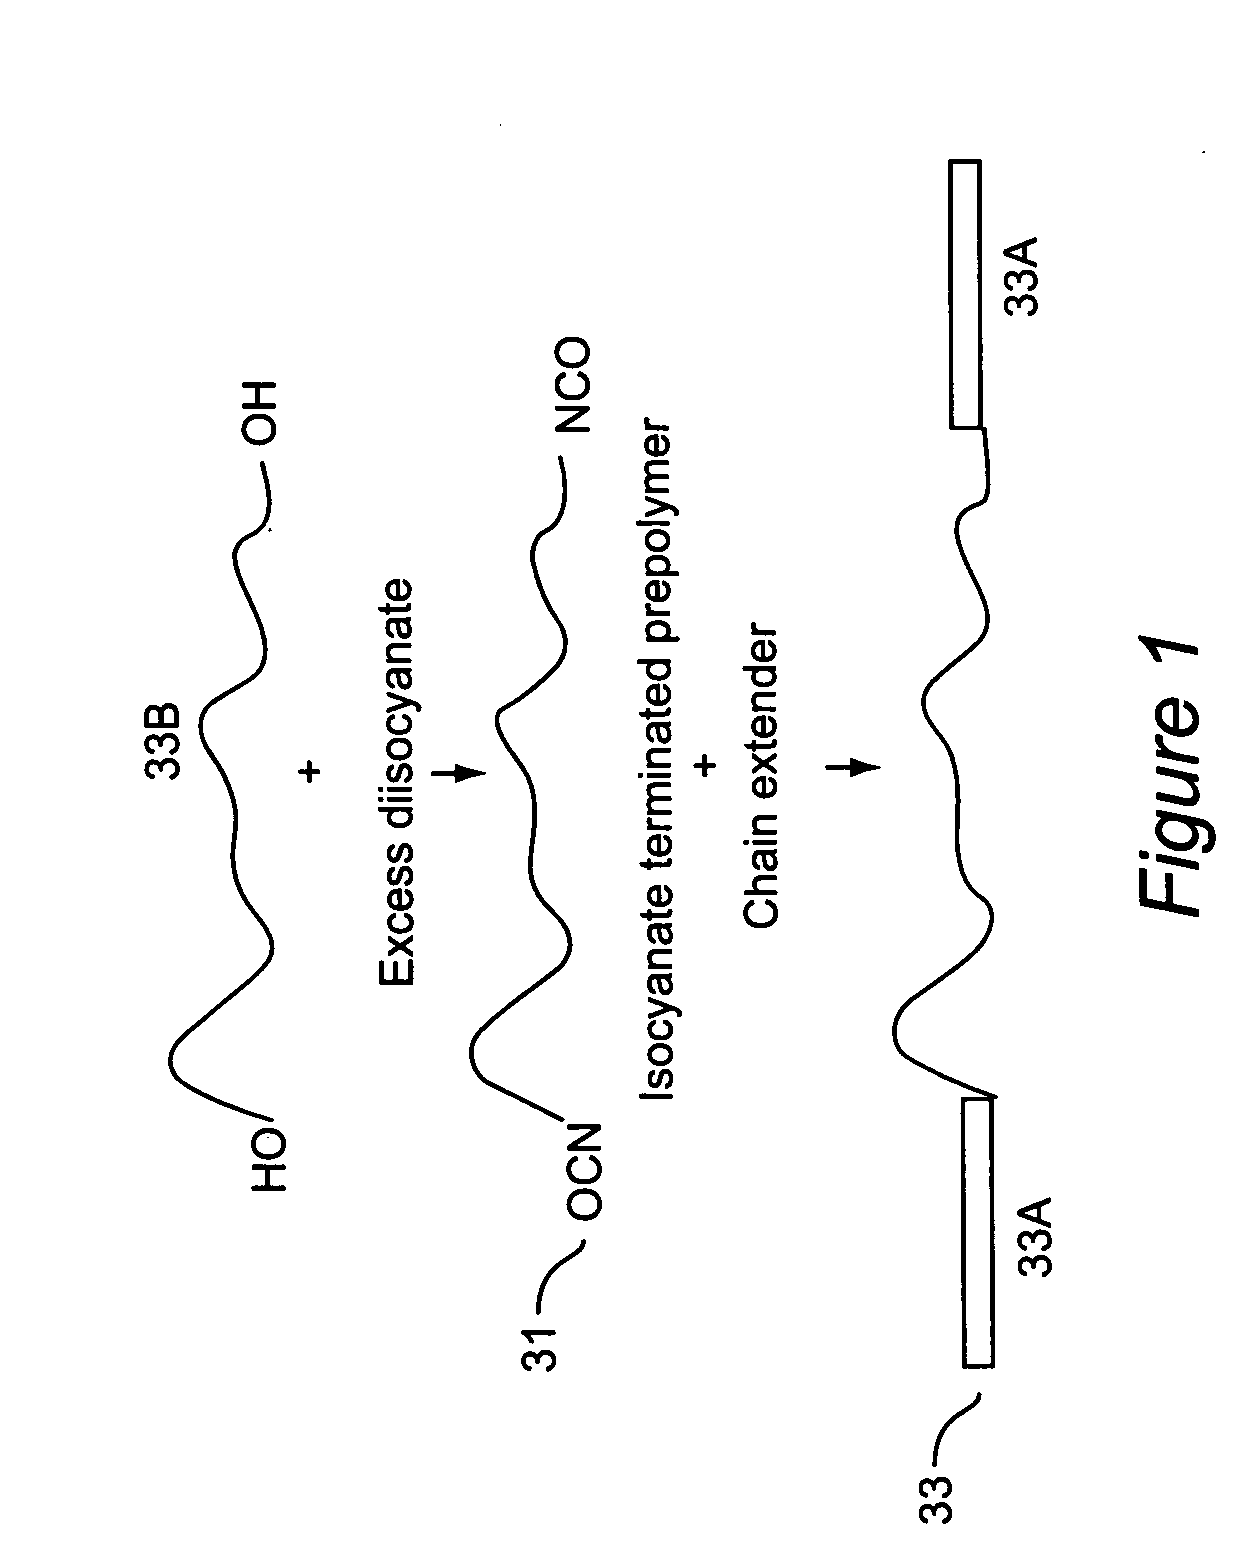 Triblock copolymers and their production methods